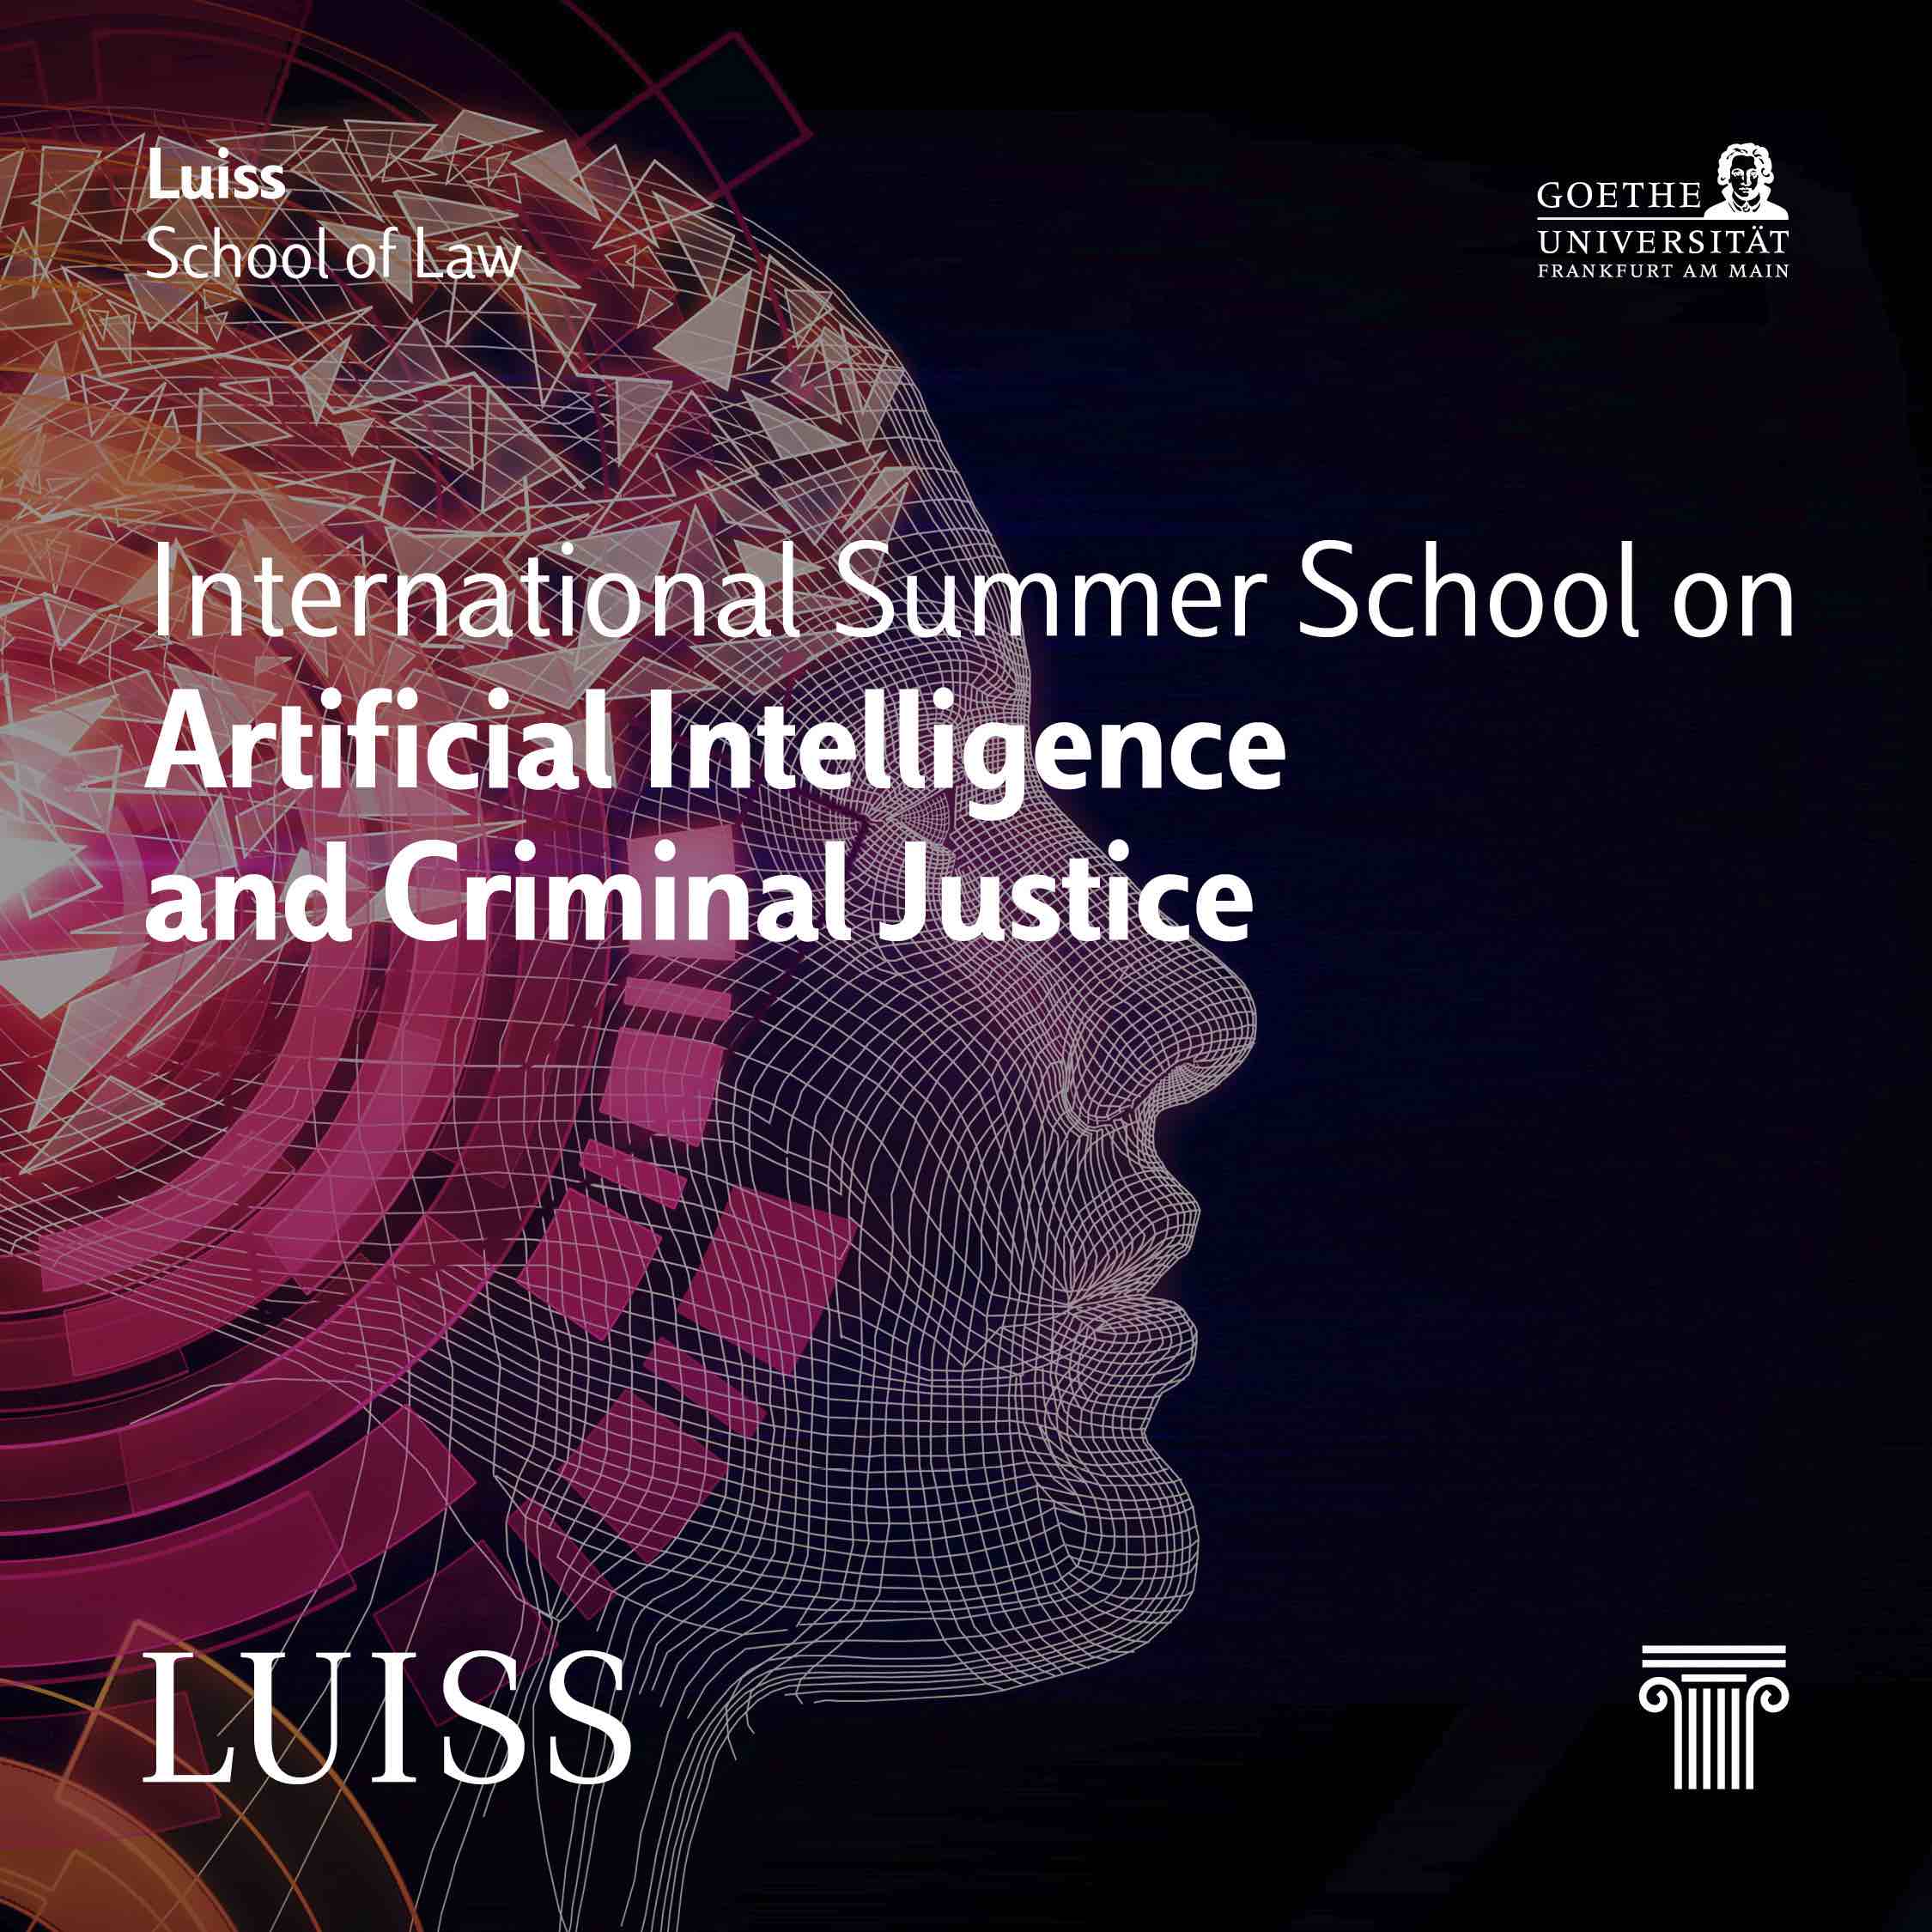 International Summer School on AI and Criminal Justice News LUISS